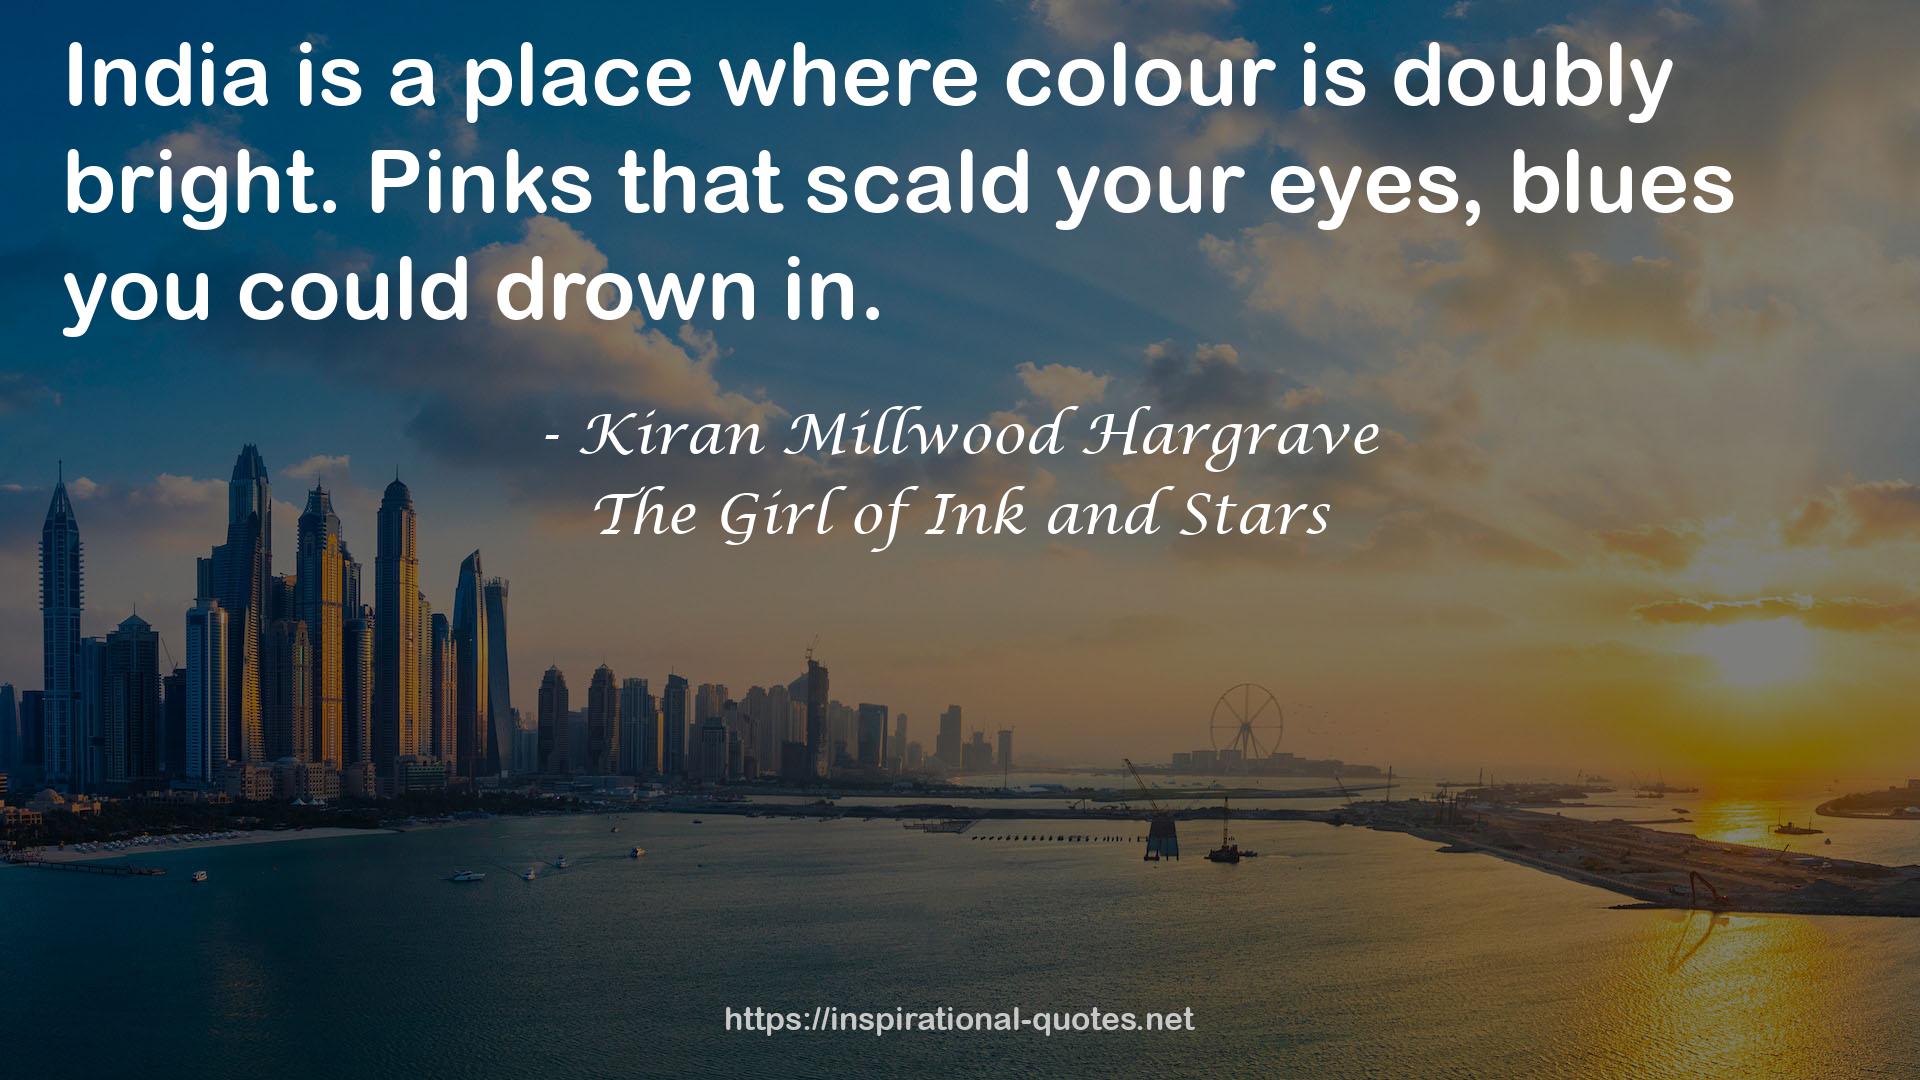 The Girl of Ink and Stars QUOTES